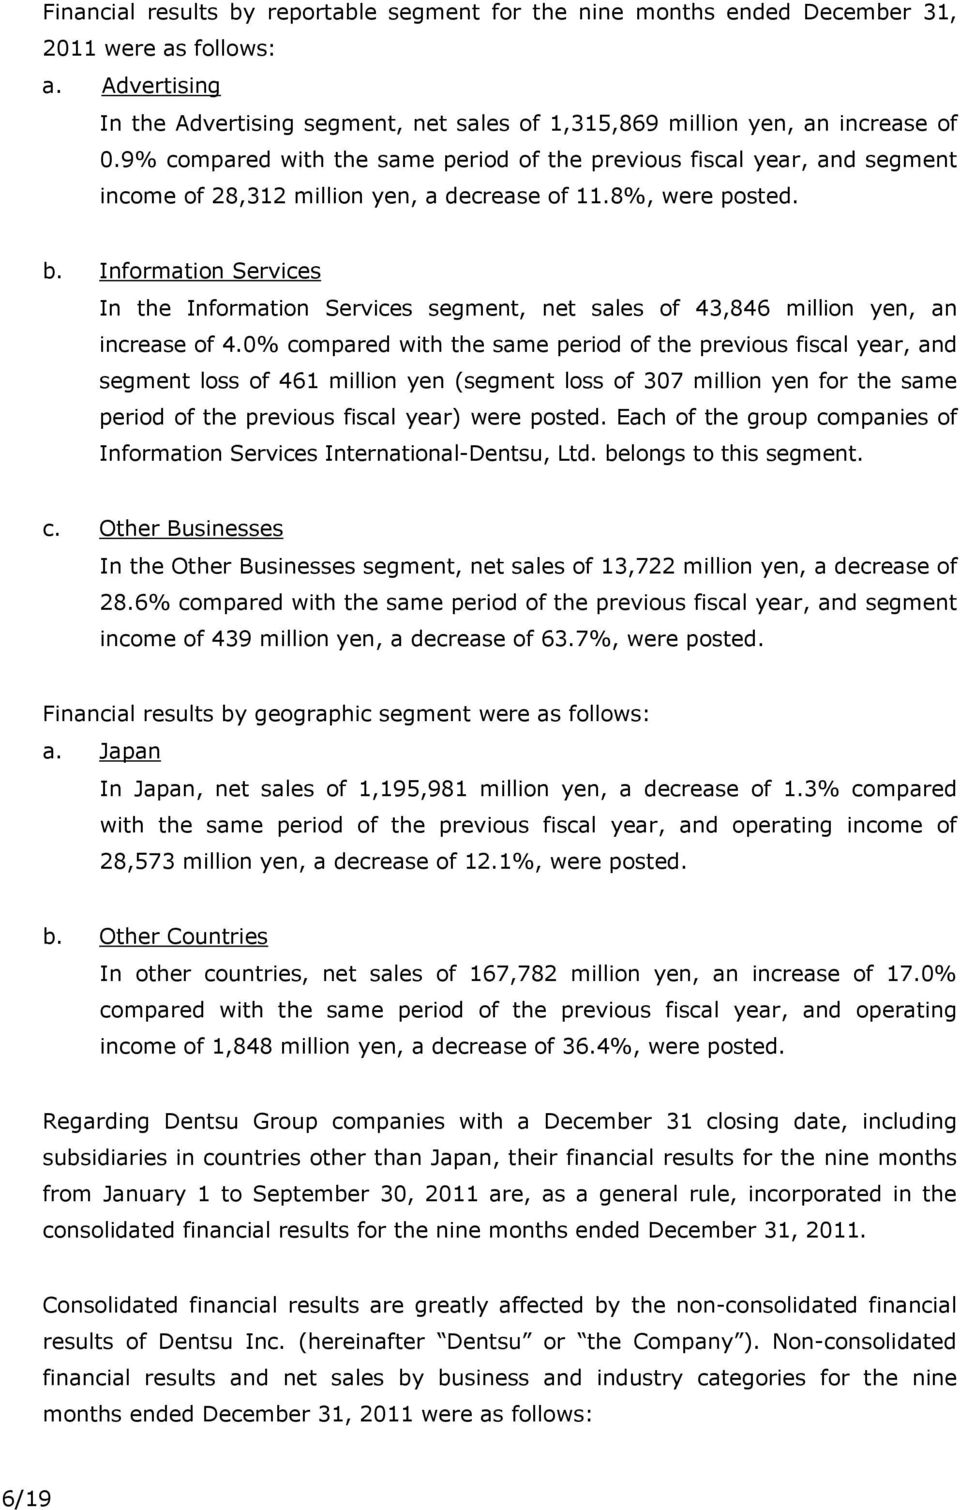 Information Services In the Information Services segment, net sales of 43,846 million yen, an increase of 4.